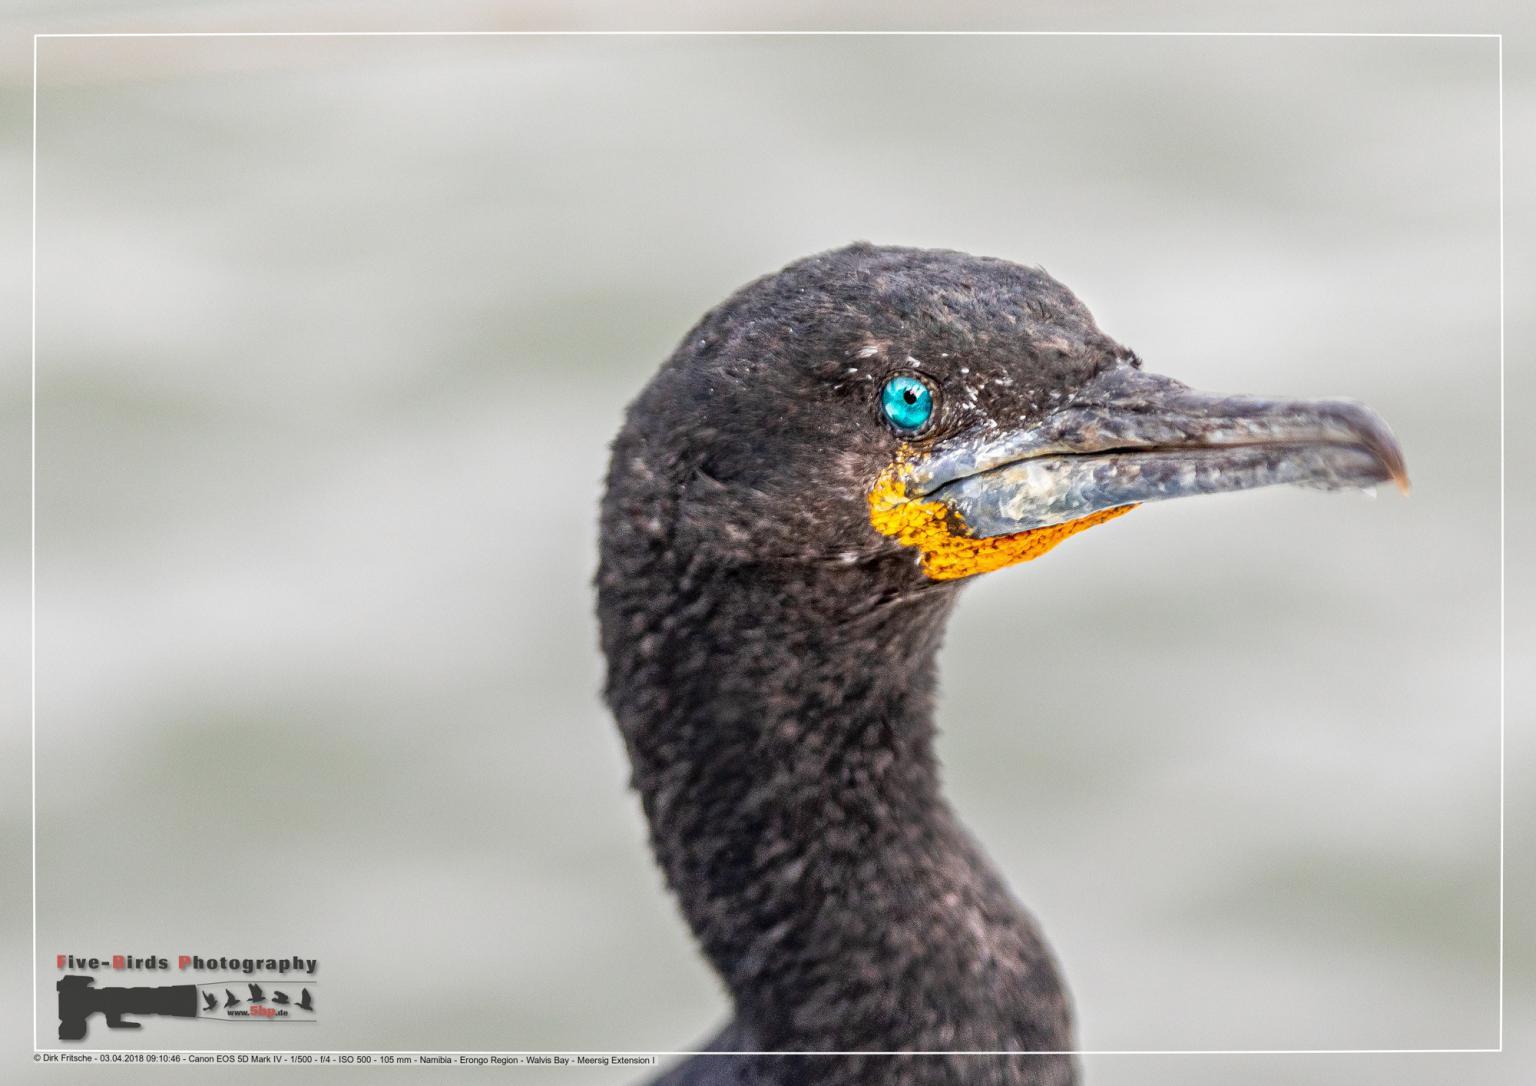 Close up of a Cape cormorant at the Atlantic Ocean near Walfis Bay in western Namibia